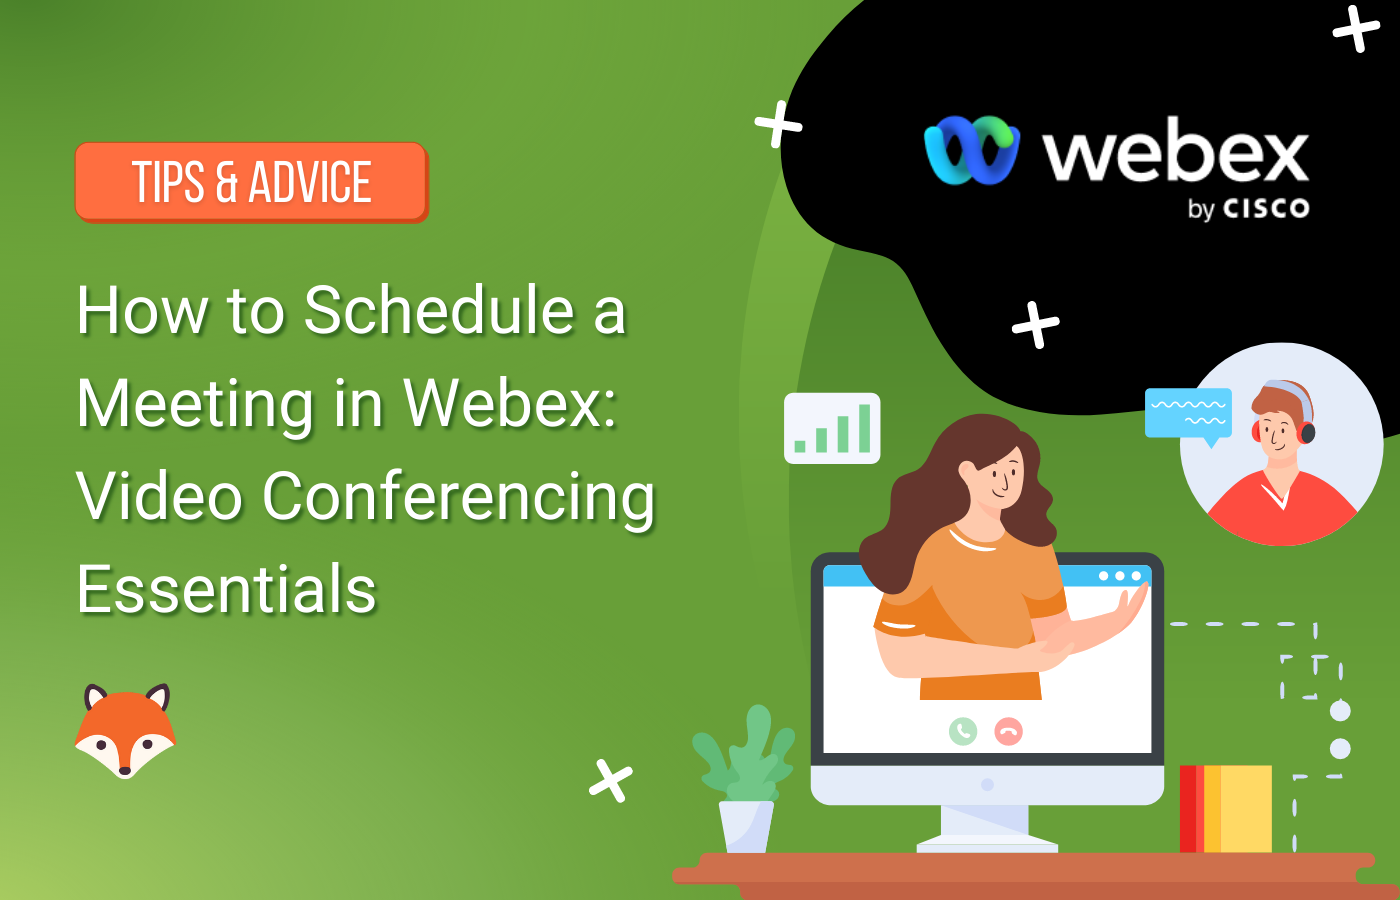 How to Schedule a Meeting in Webex Video Conferencing Essentials